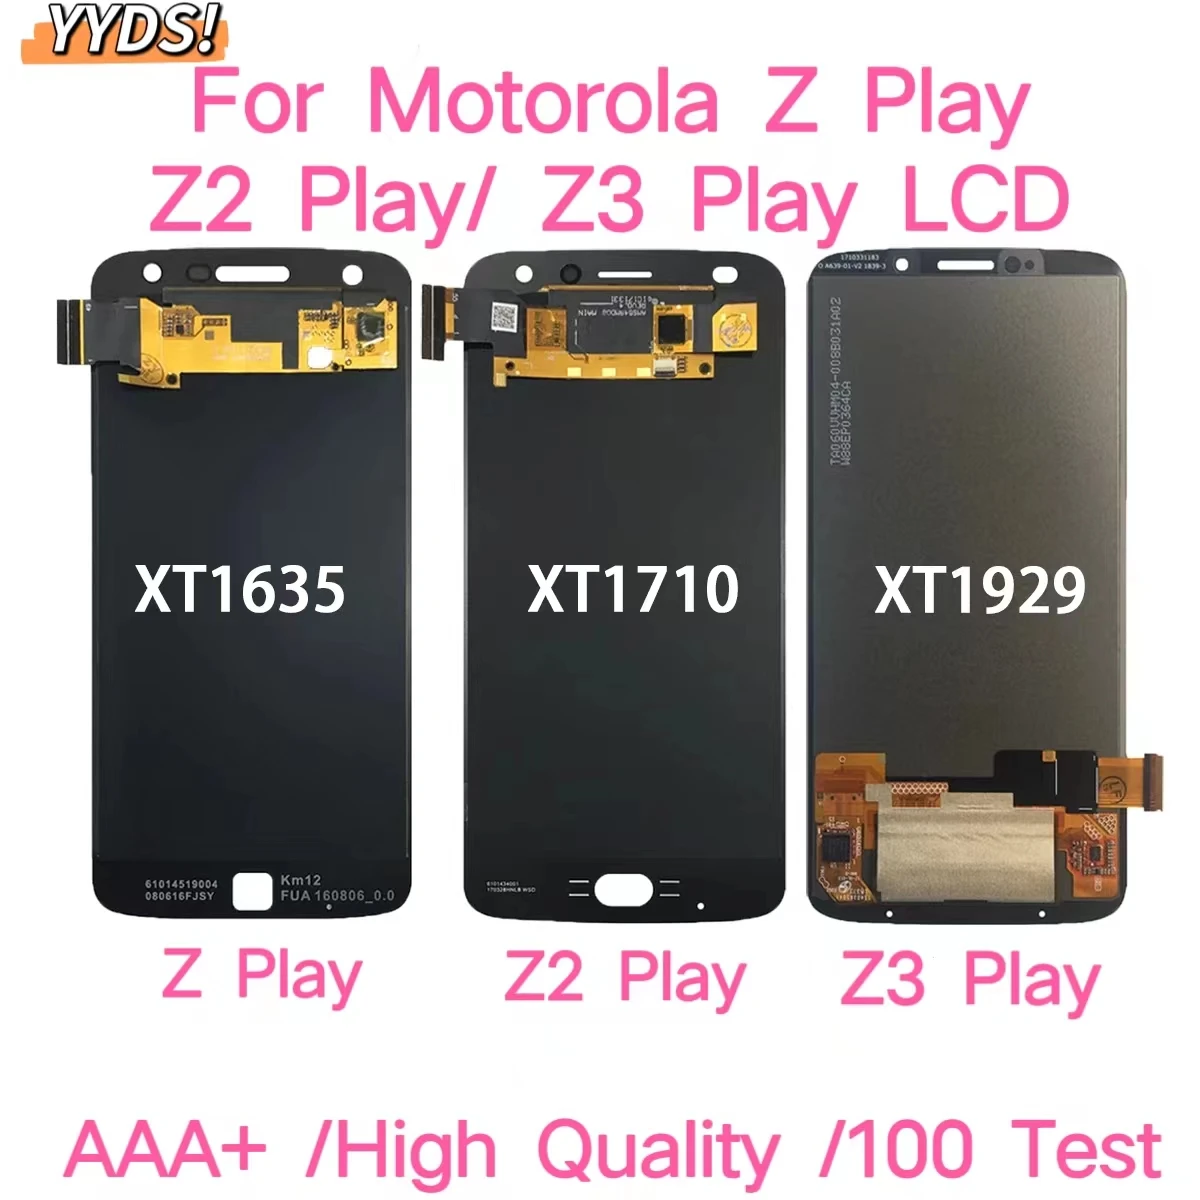 

AMOLED LCD For Motorola Moto Z Play XT1635 Z2 Play XT1710 Z3 Play XT1929 LCD Display Touch Screen Digitizer Assembly Replacement